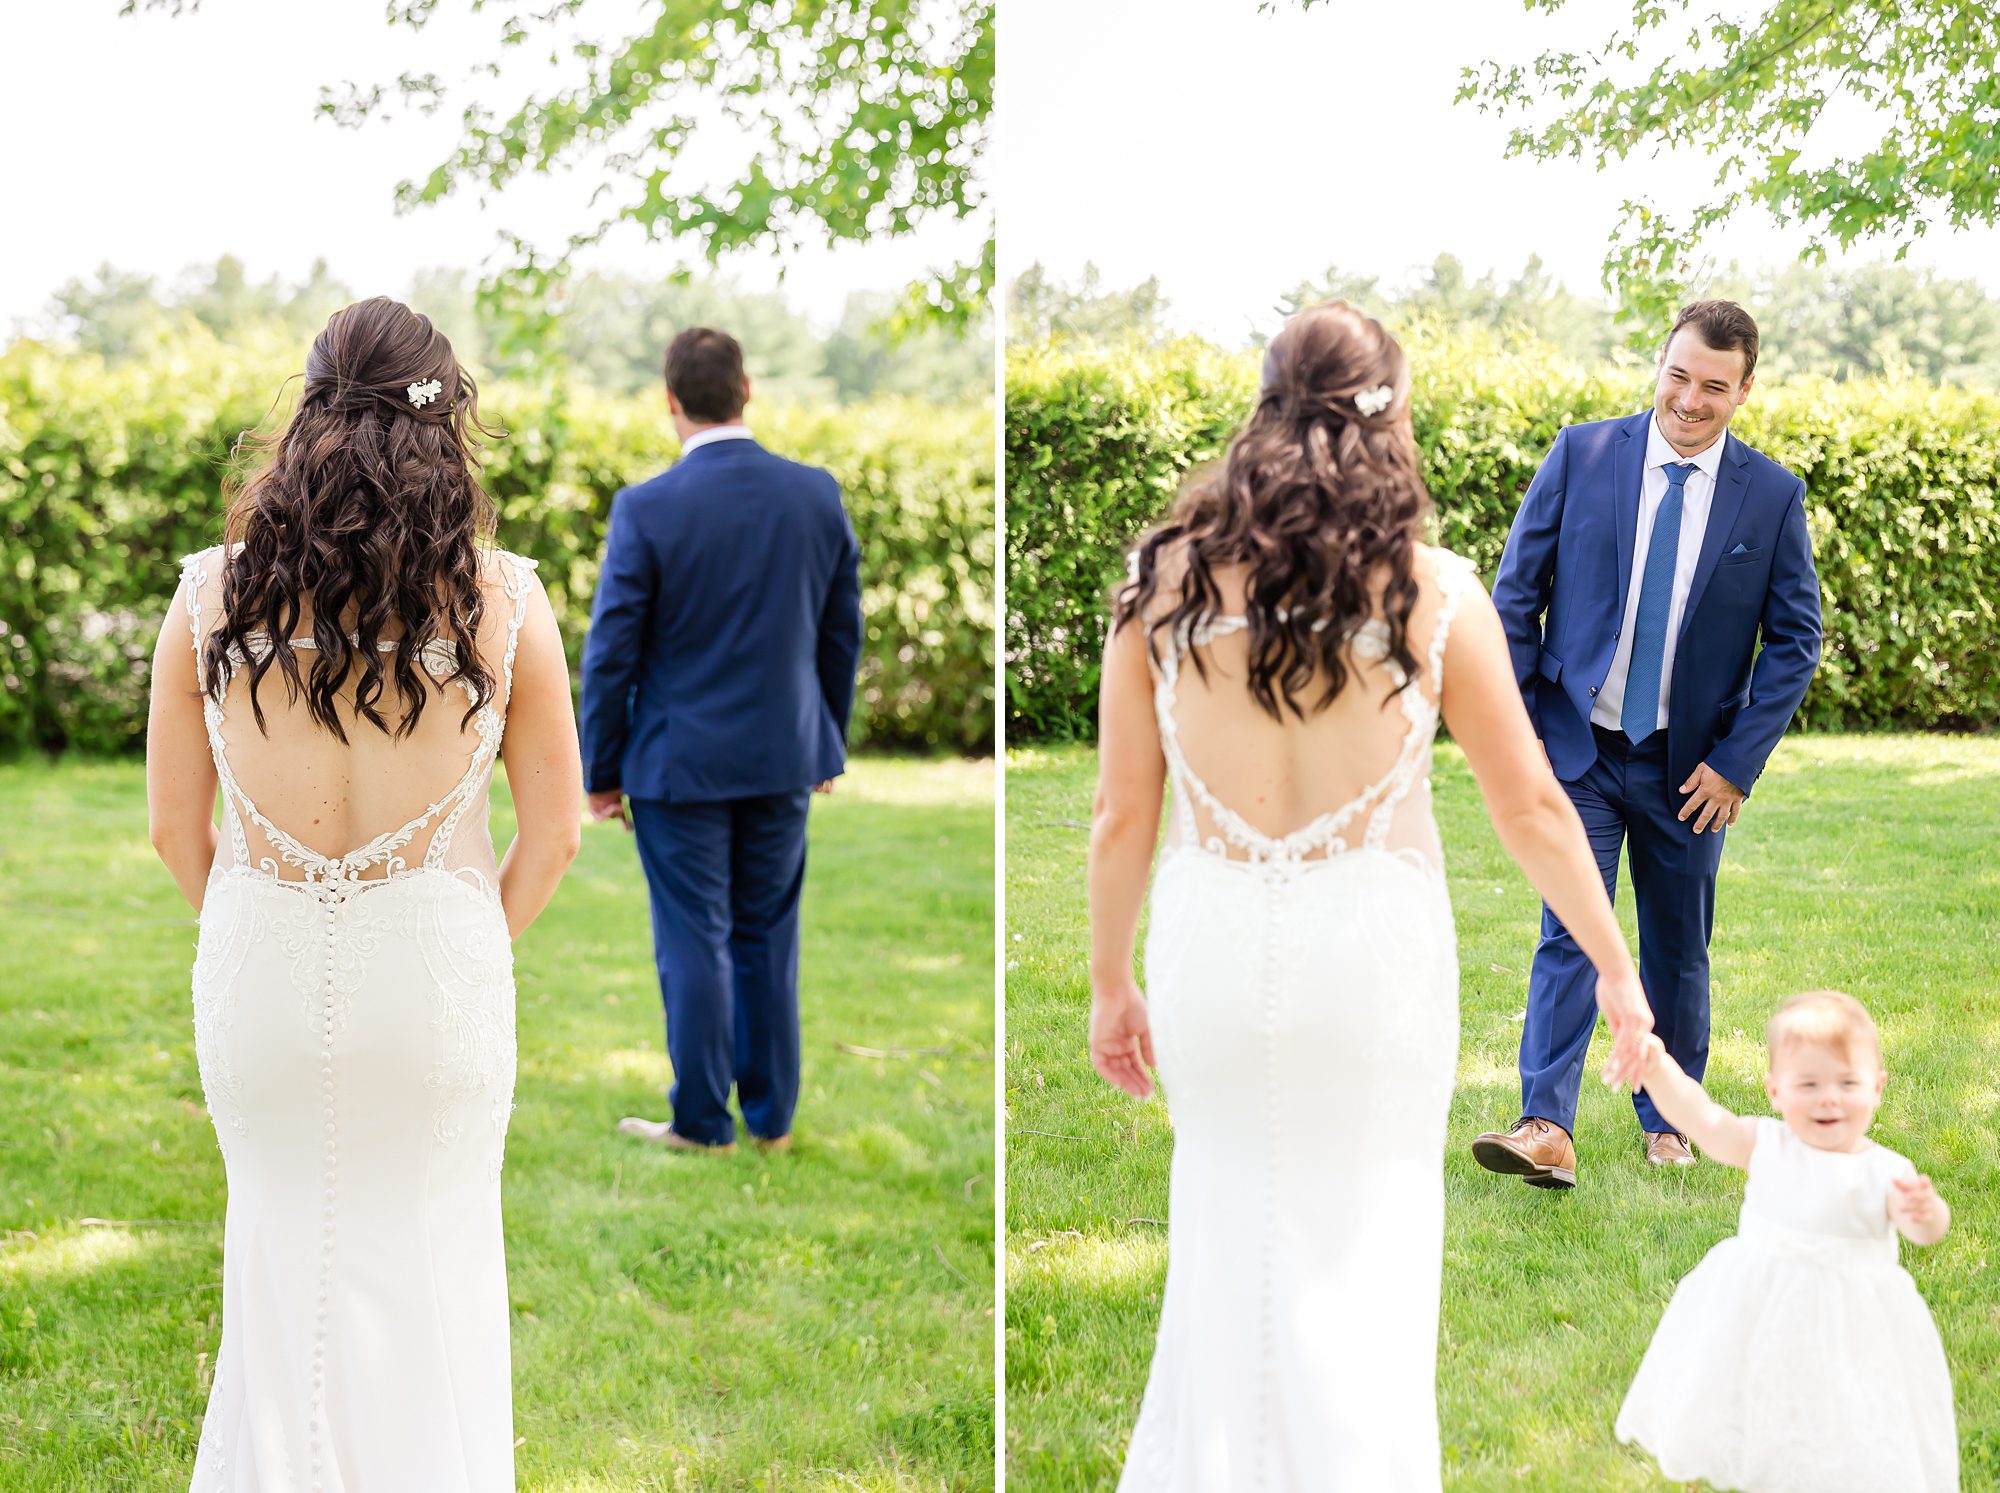 Bride and groom first look at stonecropacres winery in Morrisburg Ontario